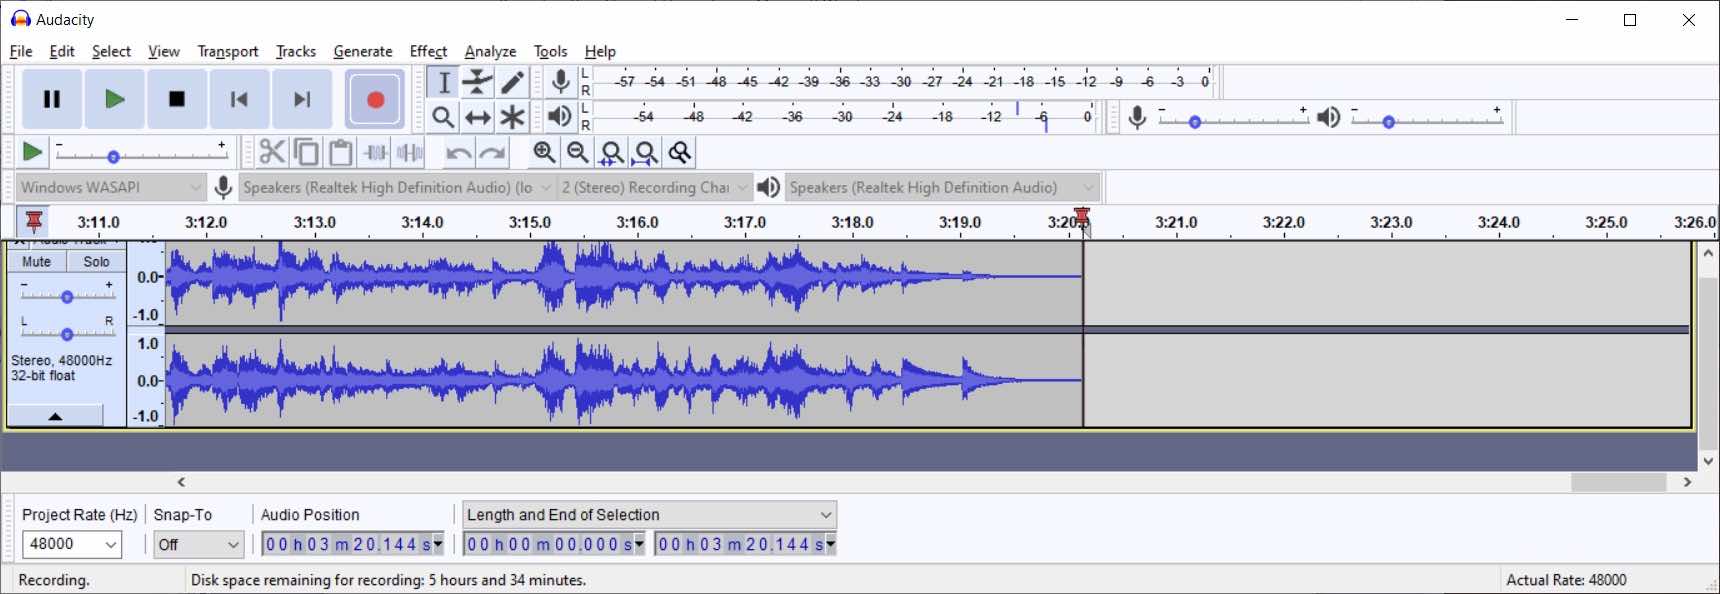 how to move tracks in audacity